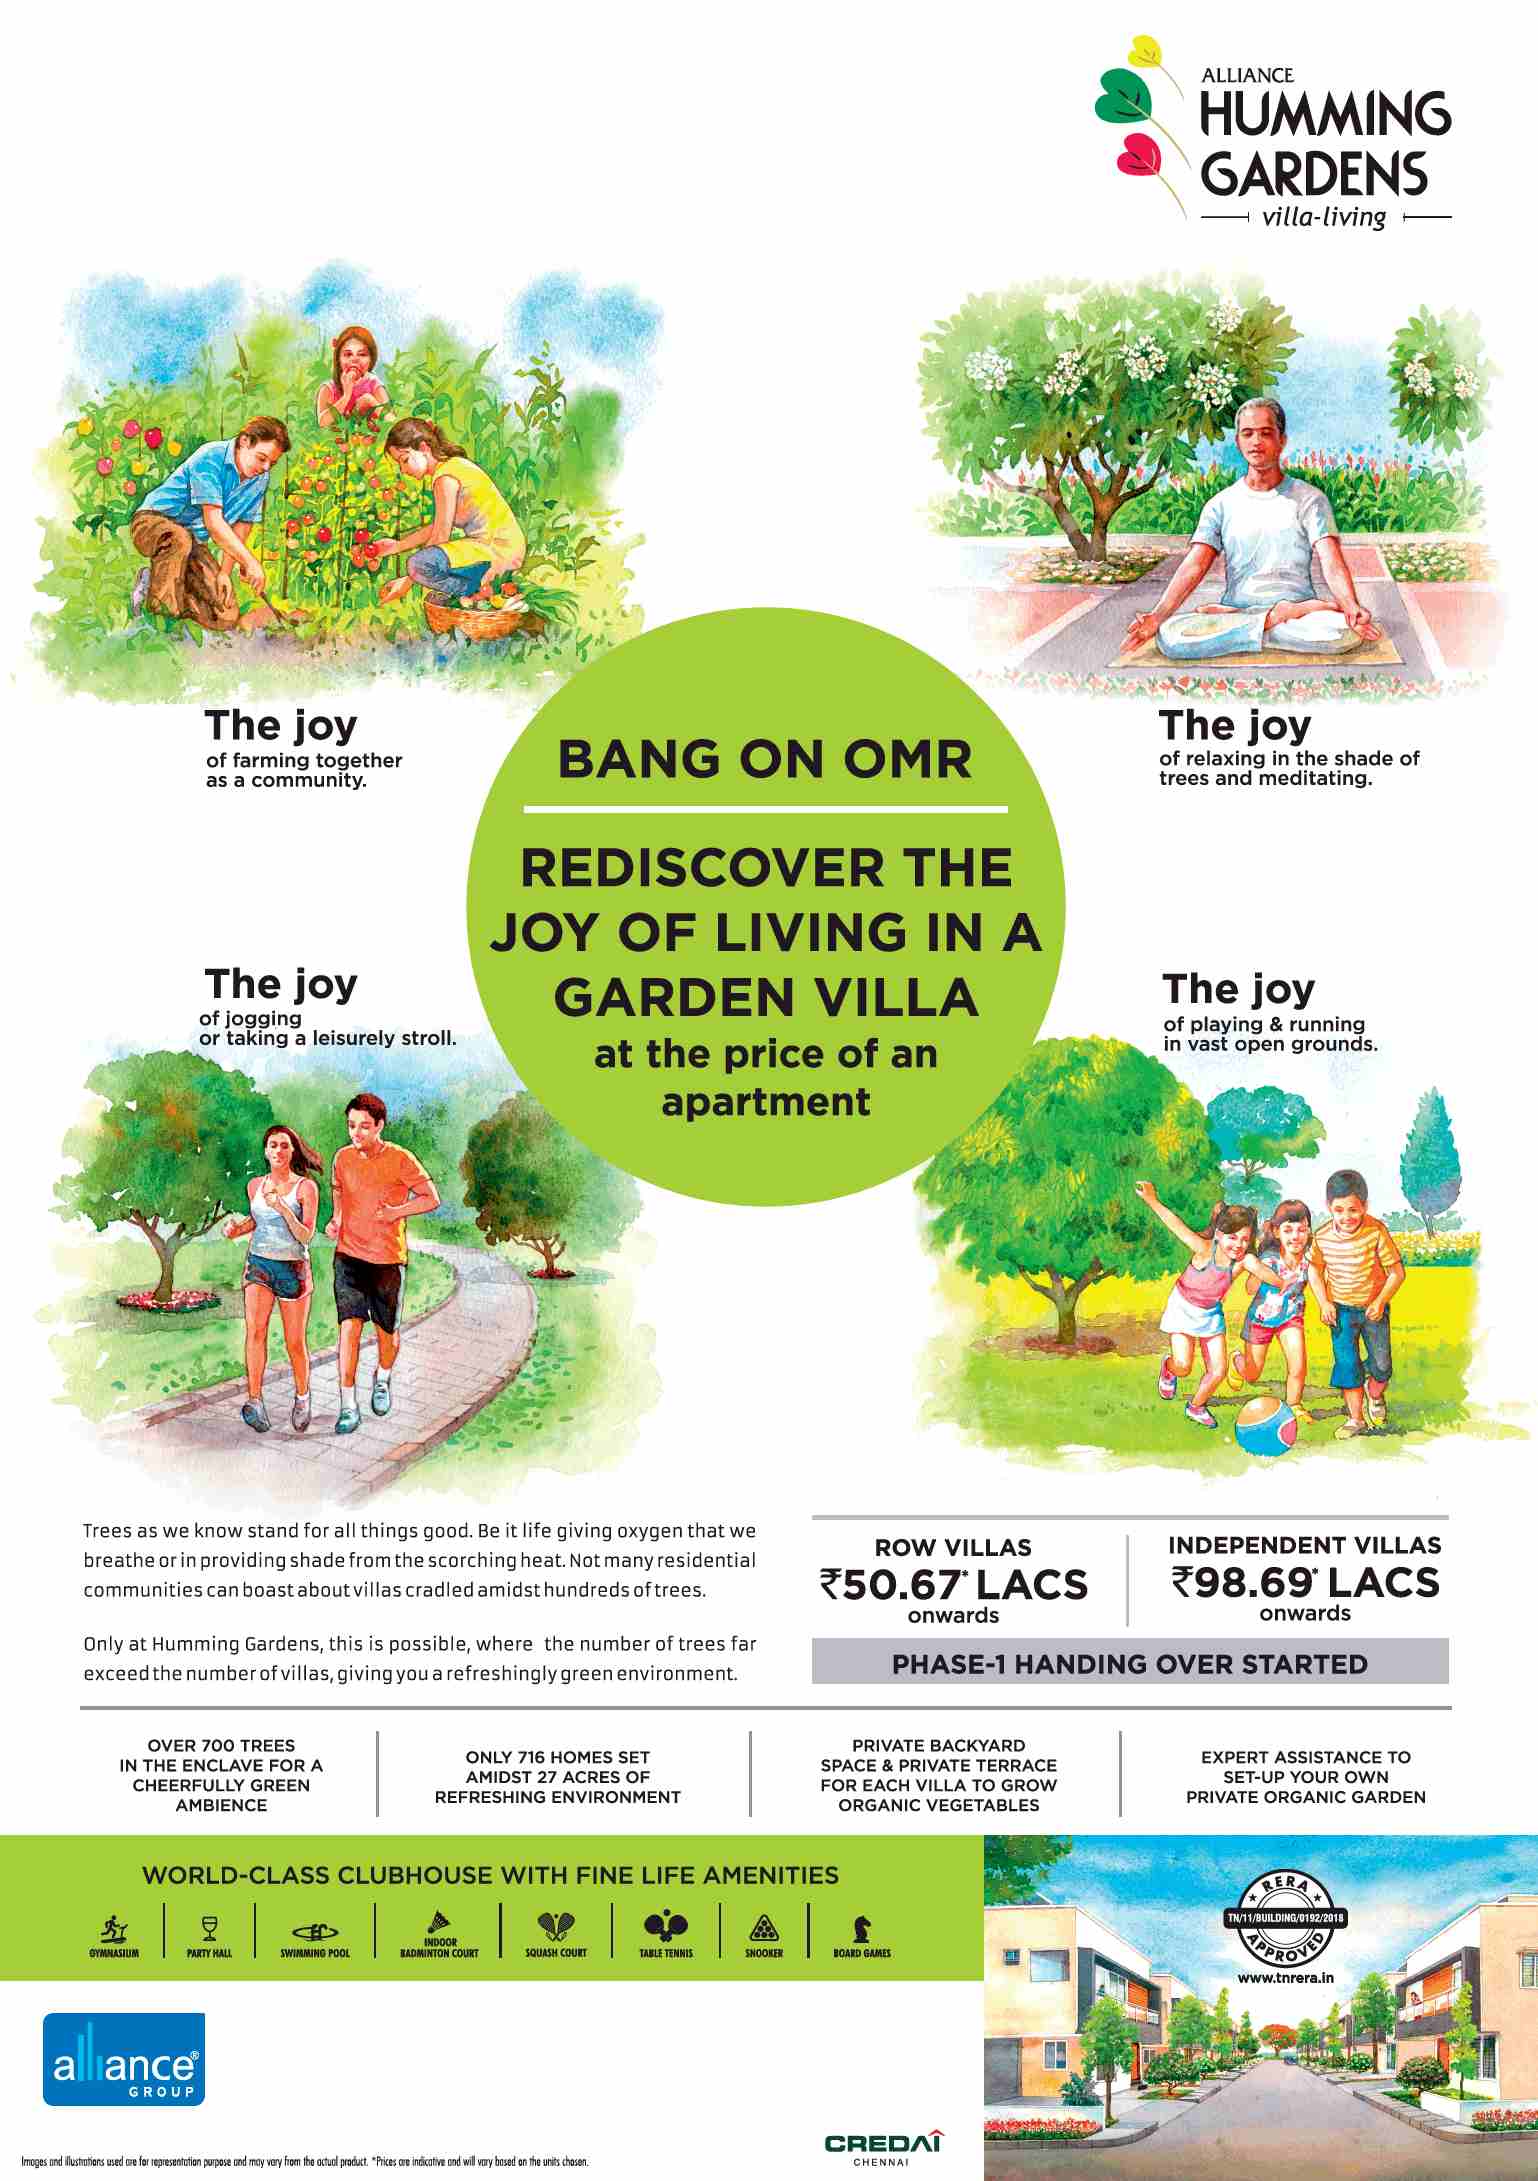 Rediscover the joy of living in a garden villa at Alliance Humming Gardens in Chennai Update